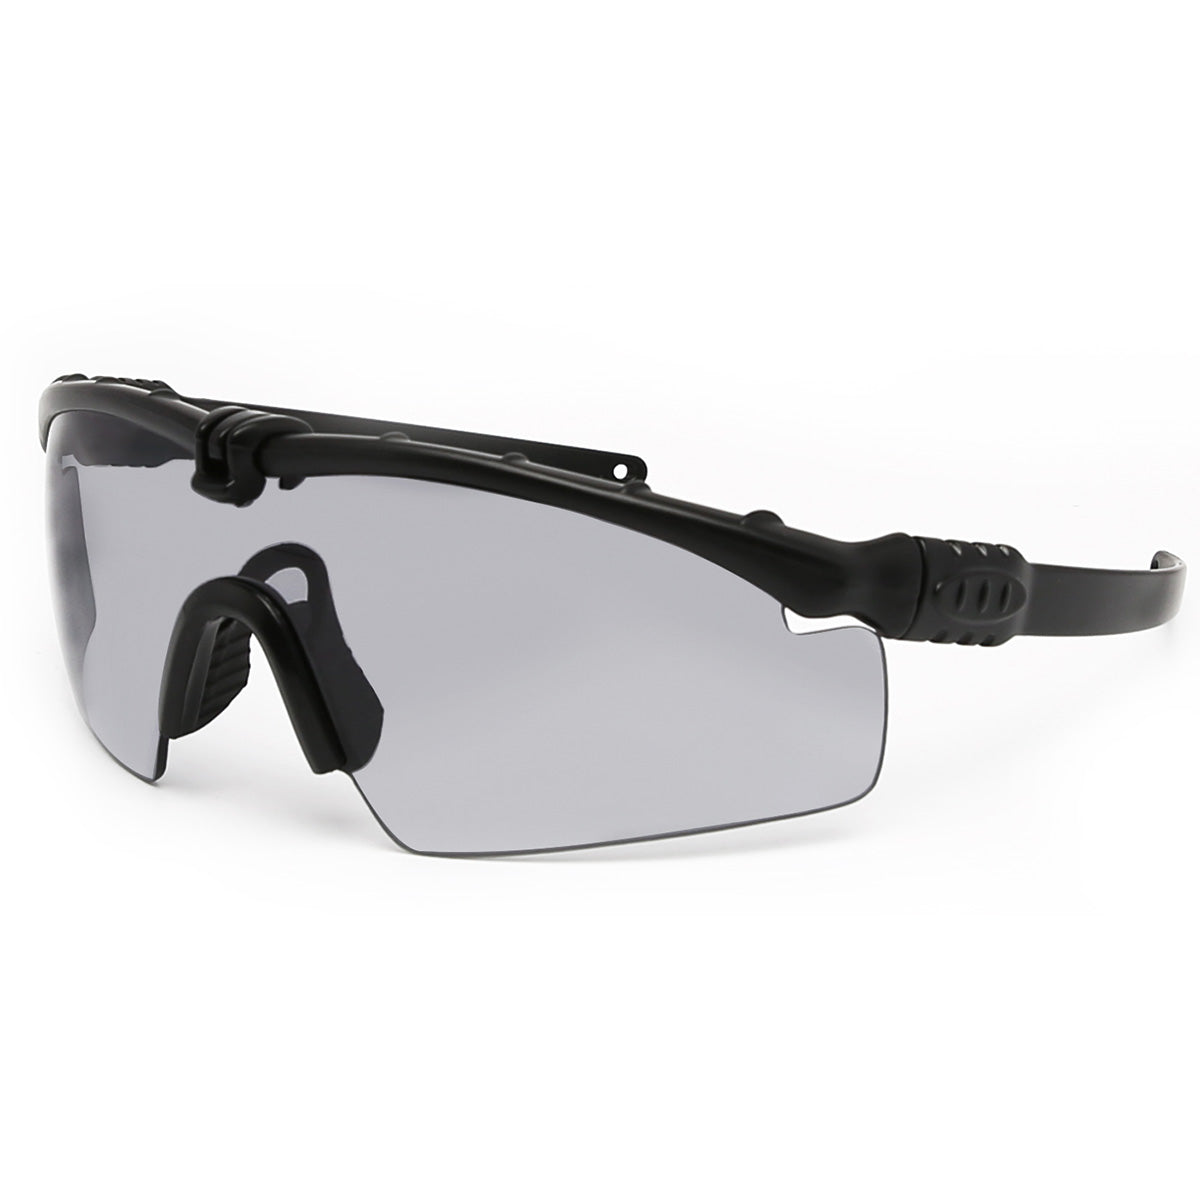 Unisex Sporty with headband & 3 interchangeable Color Lense Cycling Sunglasses